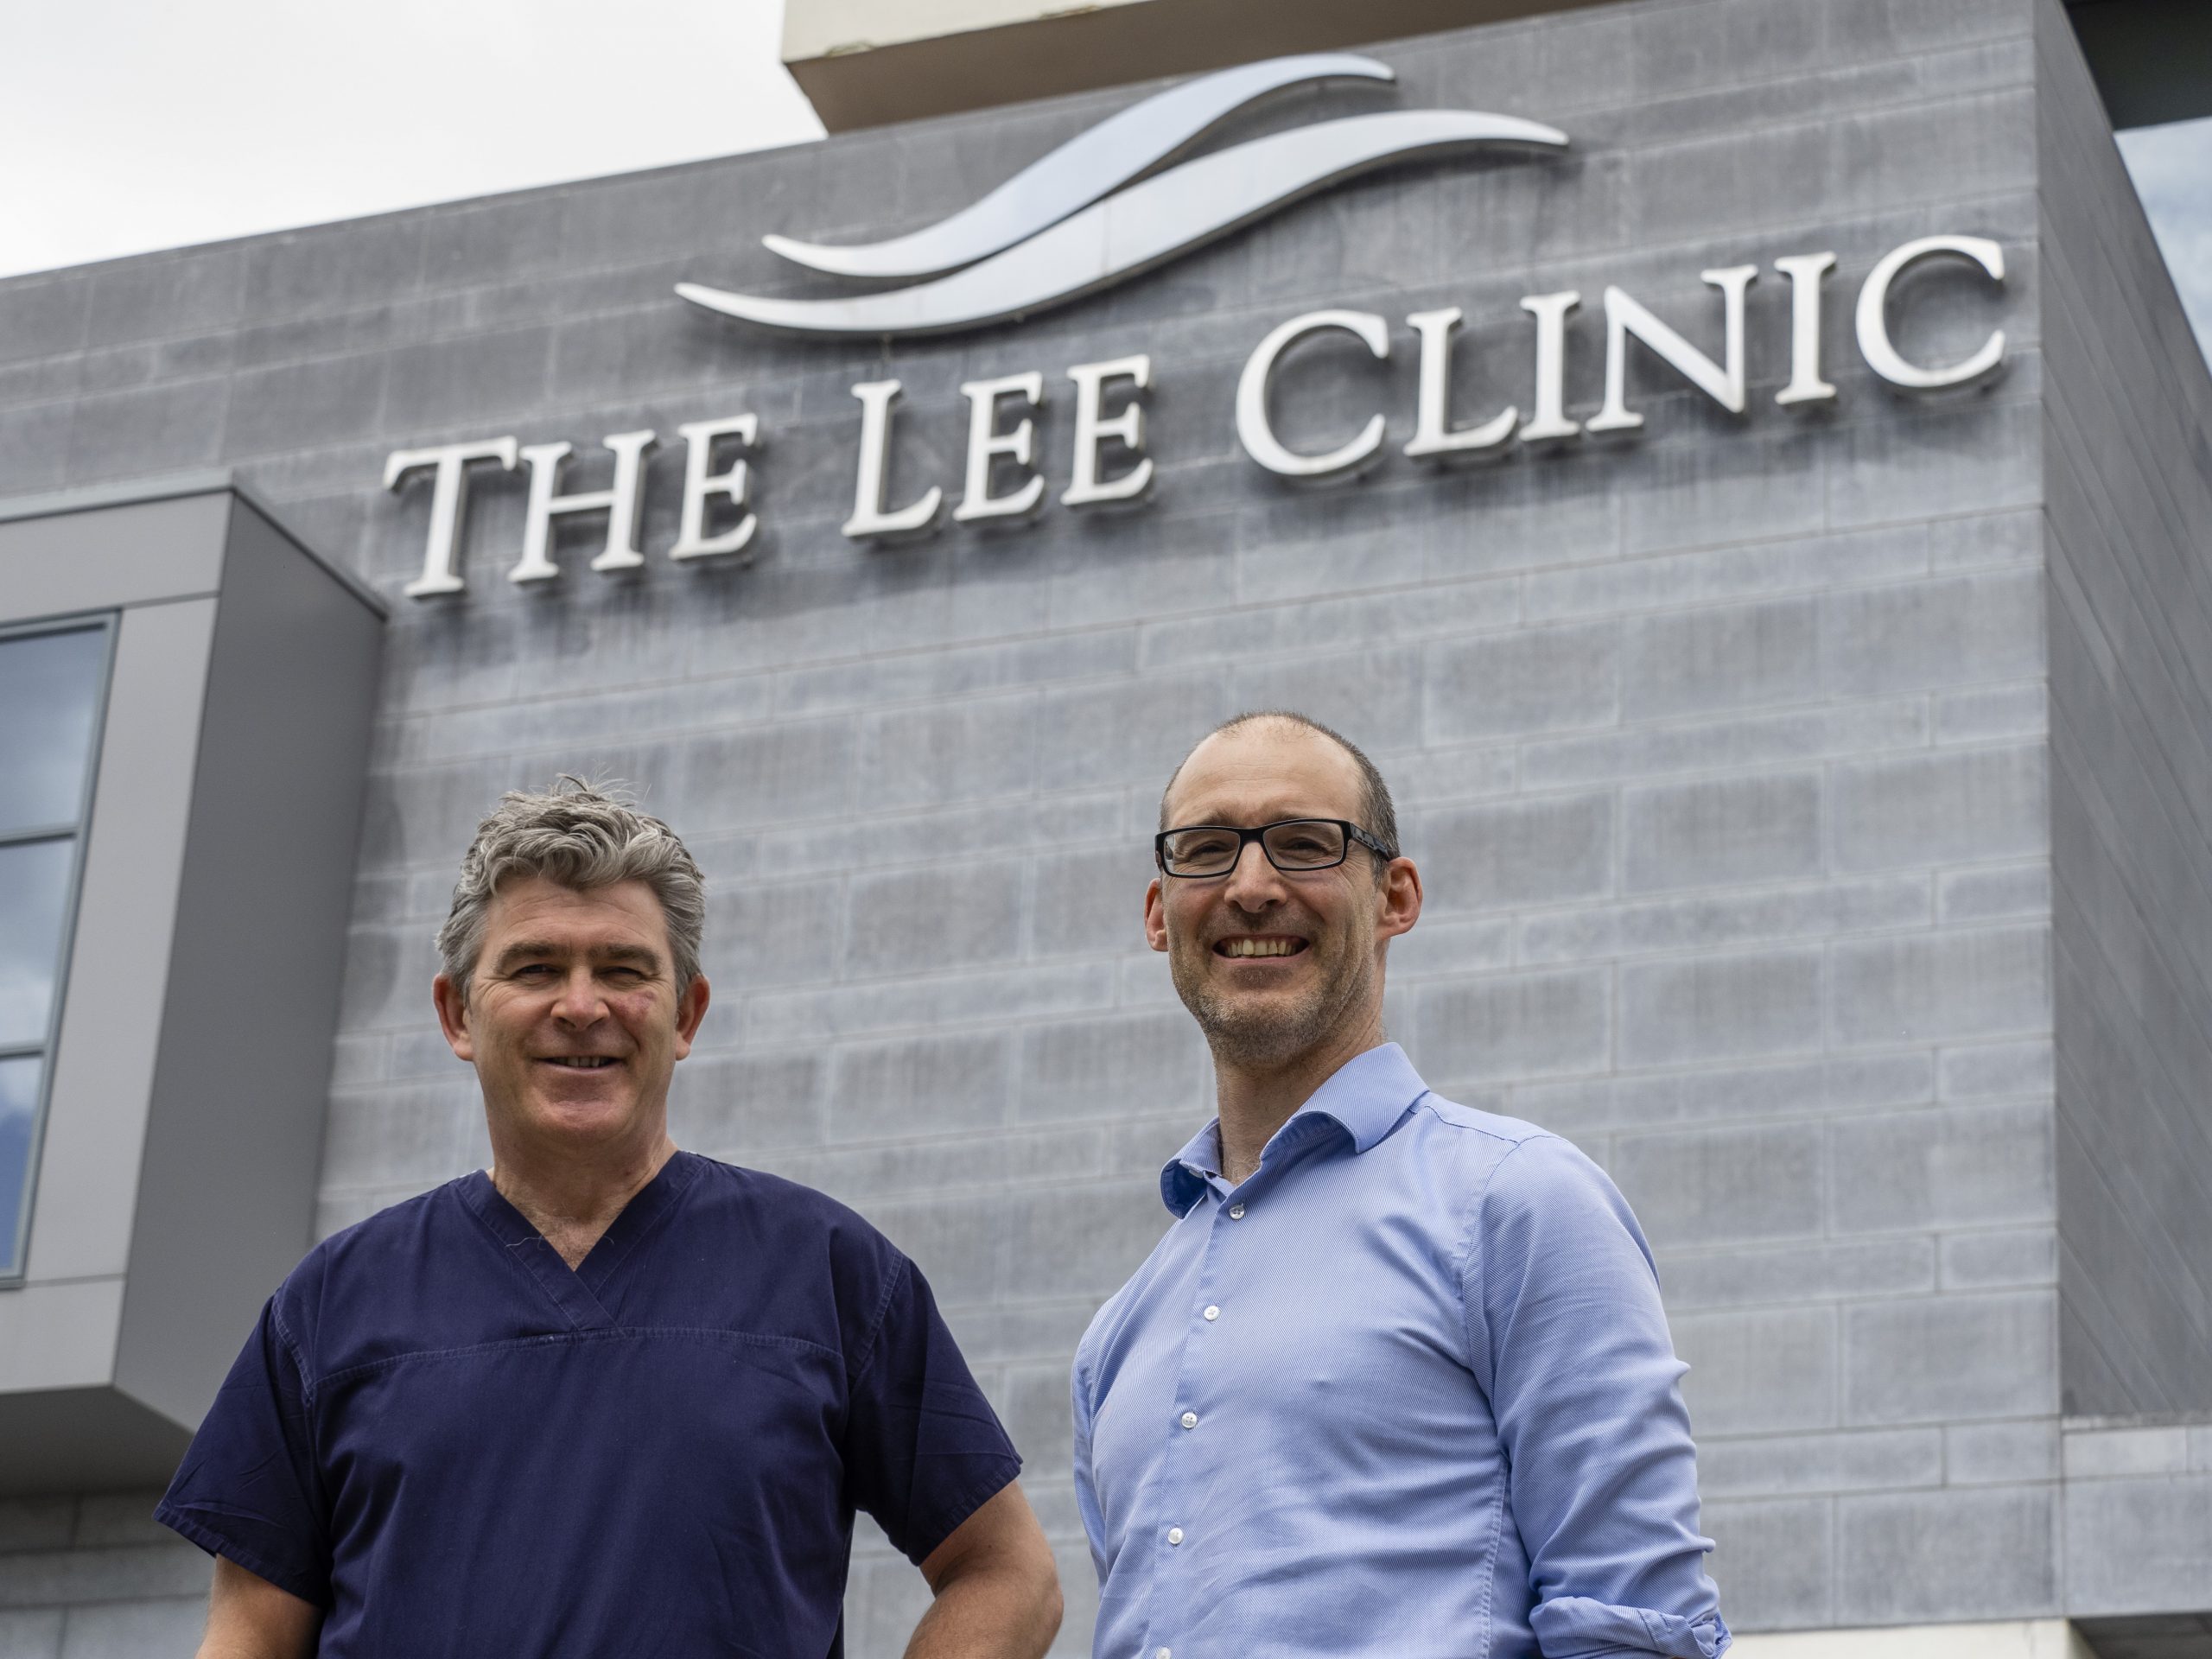 About Us - Lee Clinic